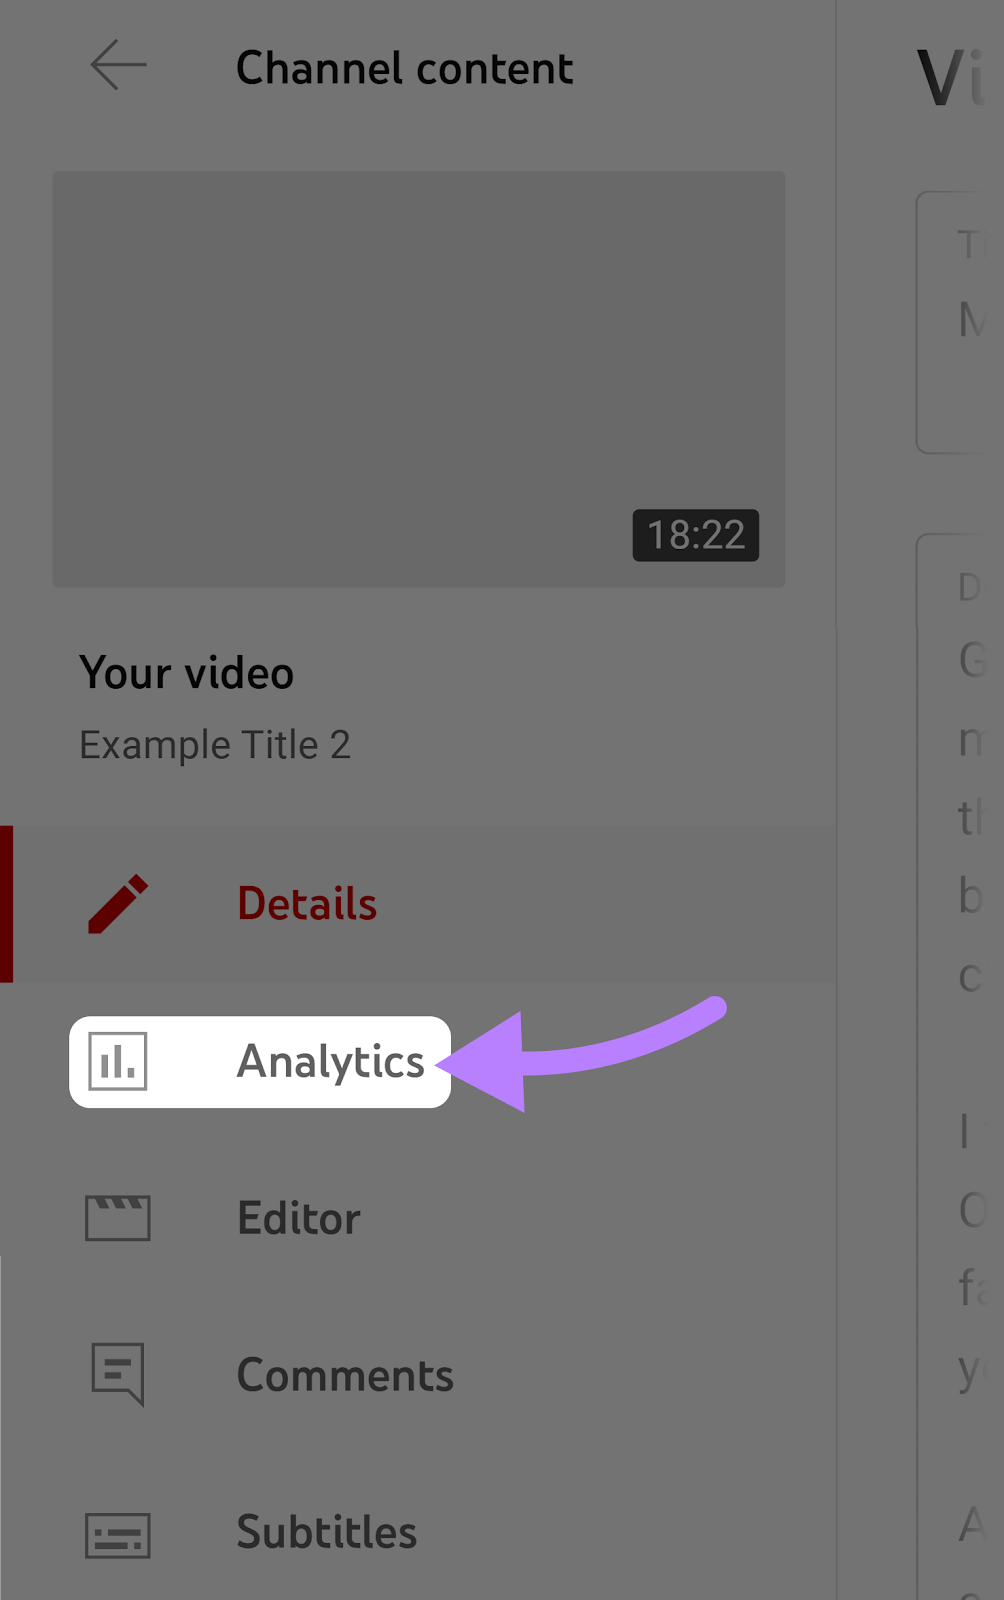 "Analytics" option selected for the chosen video